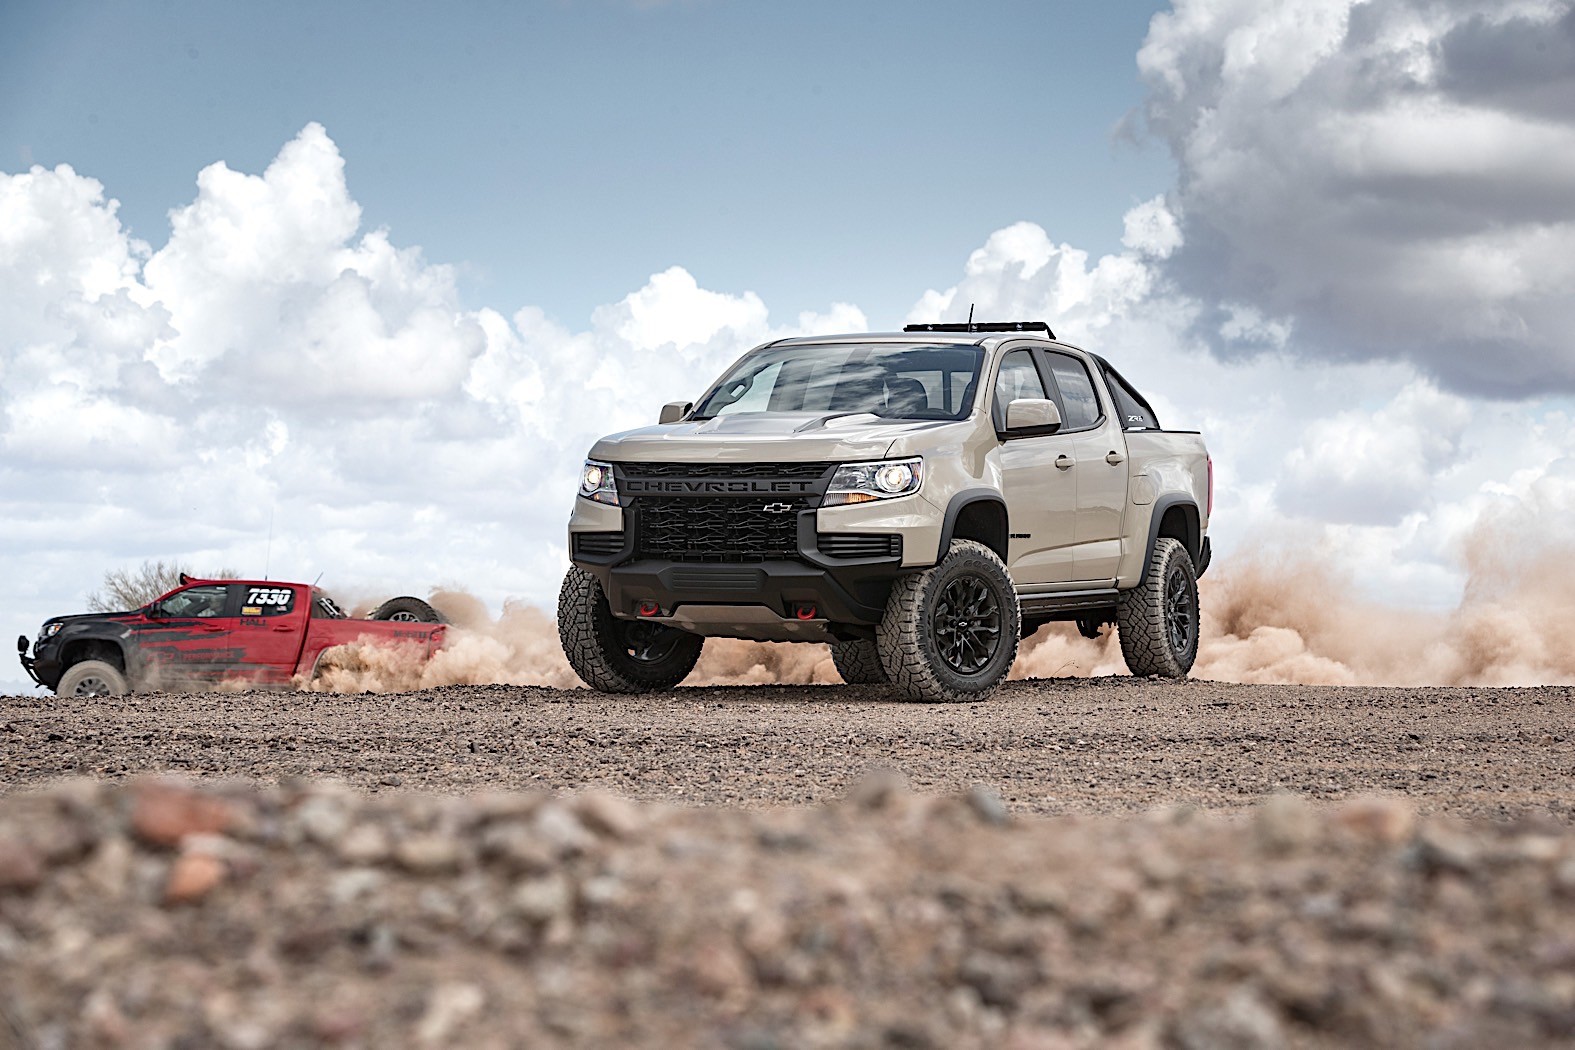 New Chevy Colorado Confirmed With Two New Design Packages, Special ...